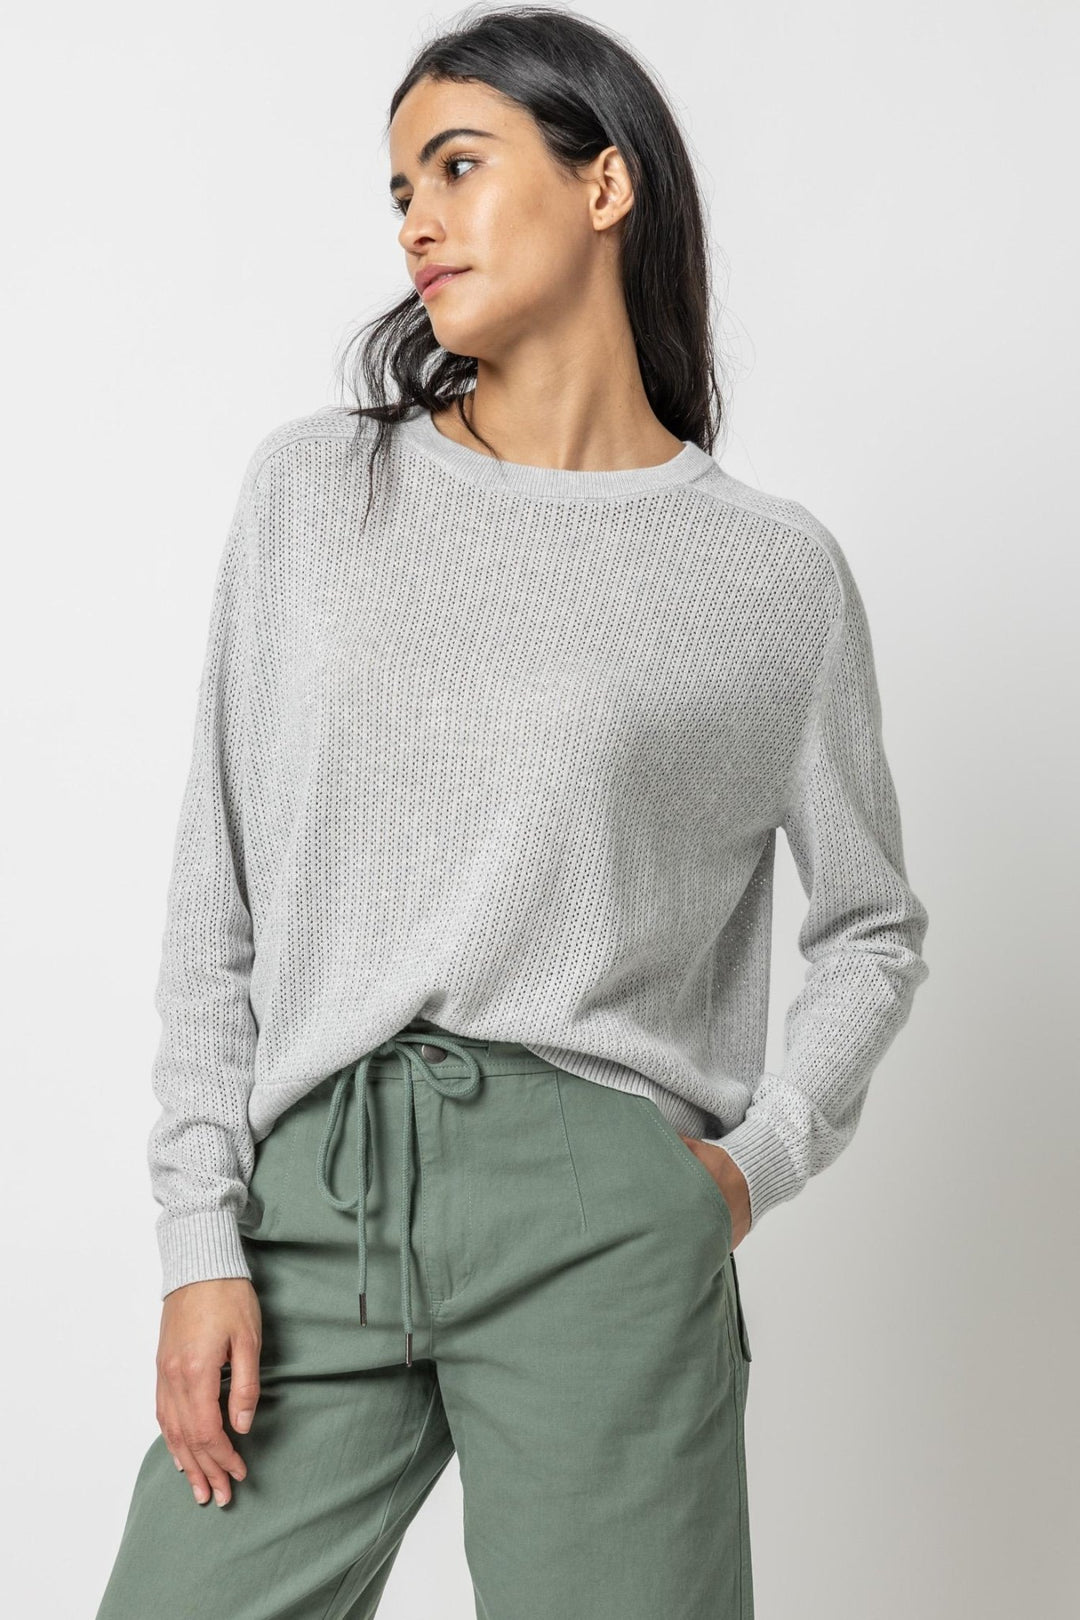 Lilla P - Saddle Sleeve Pullover Sweater: Ash - Shorely Chic Boutique